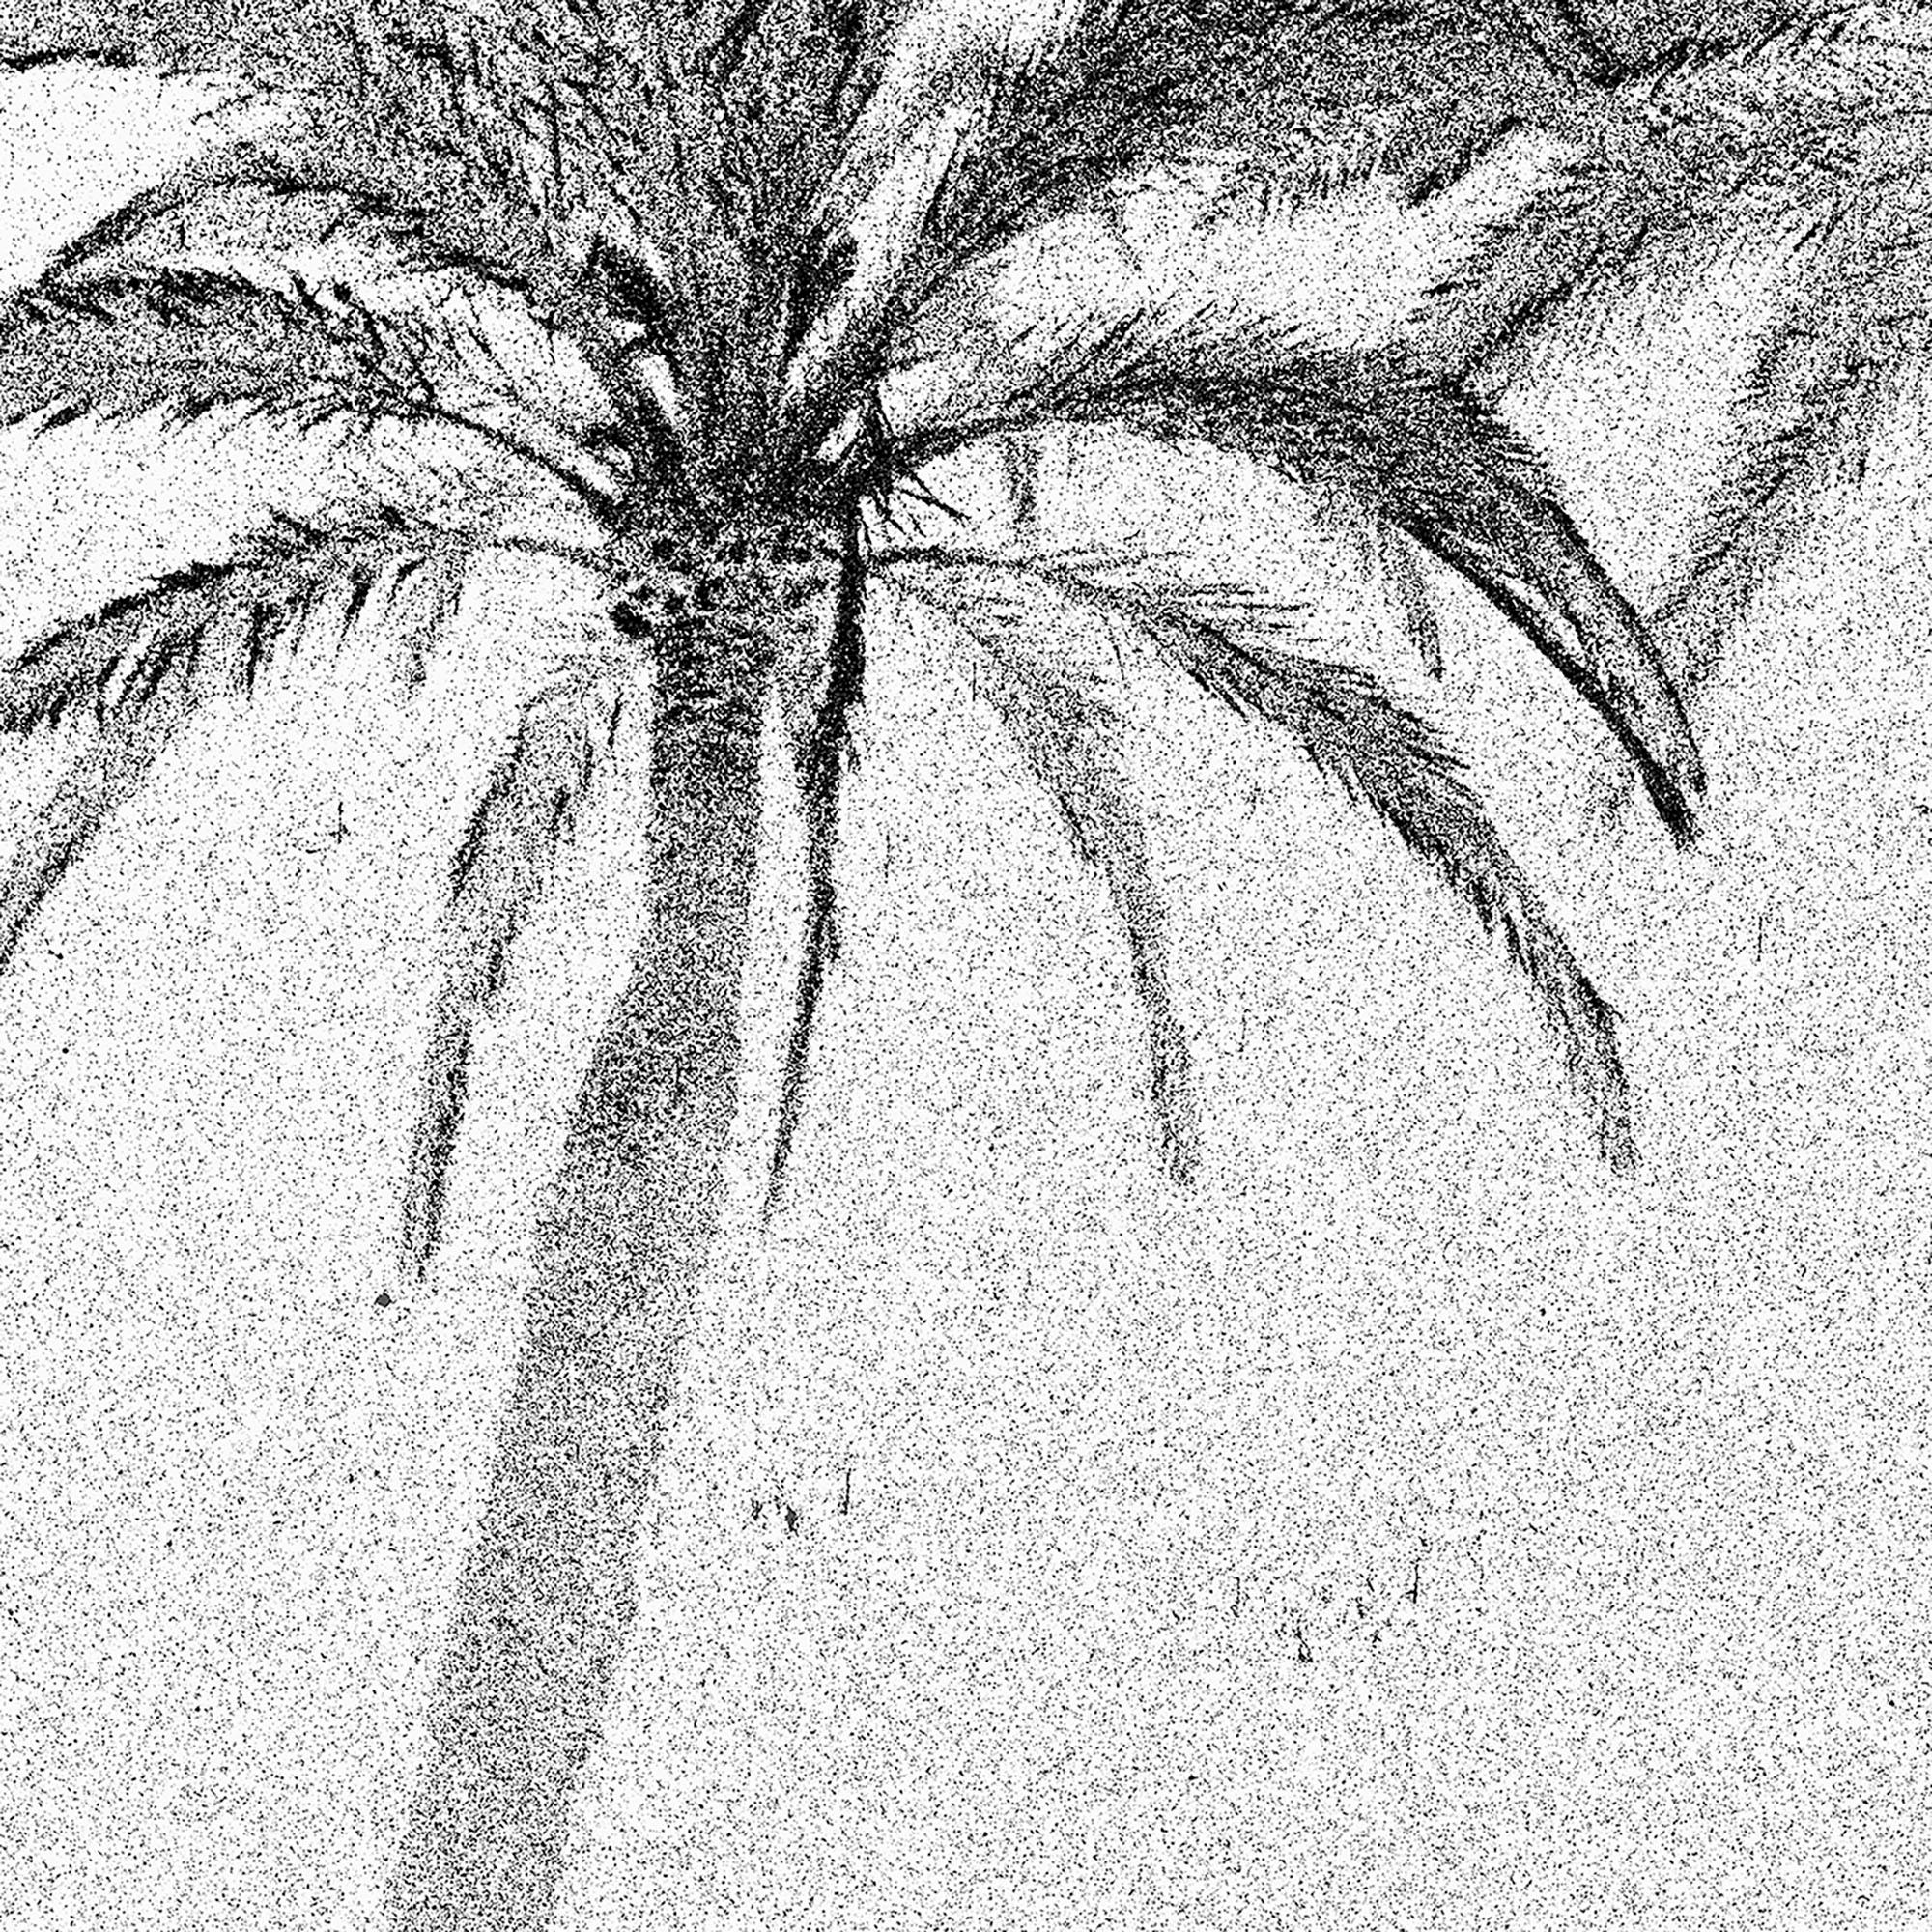 how to draw a realistic palm tree